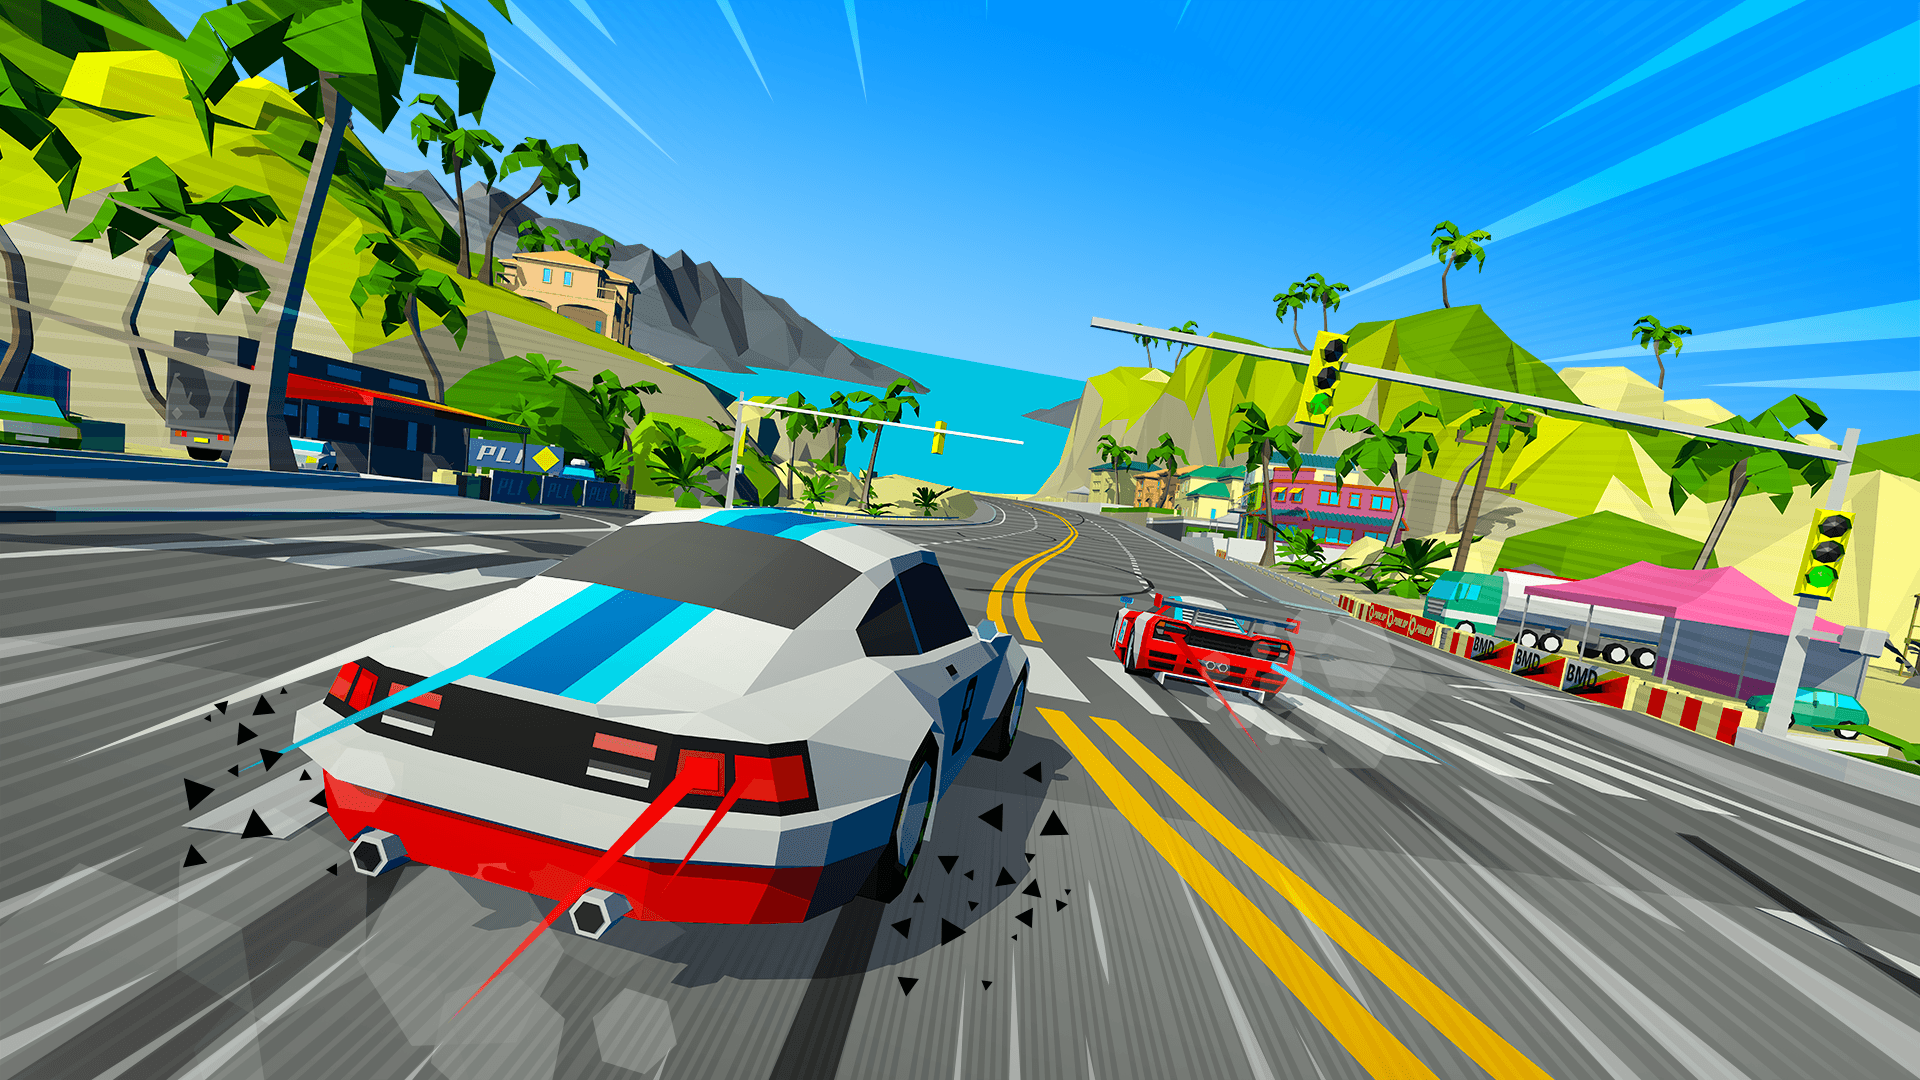 Hotshot Racing Brings Arcade Thrills to PS4 on September 10th, 2020